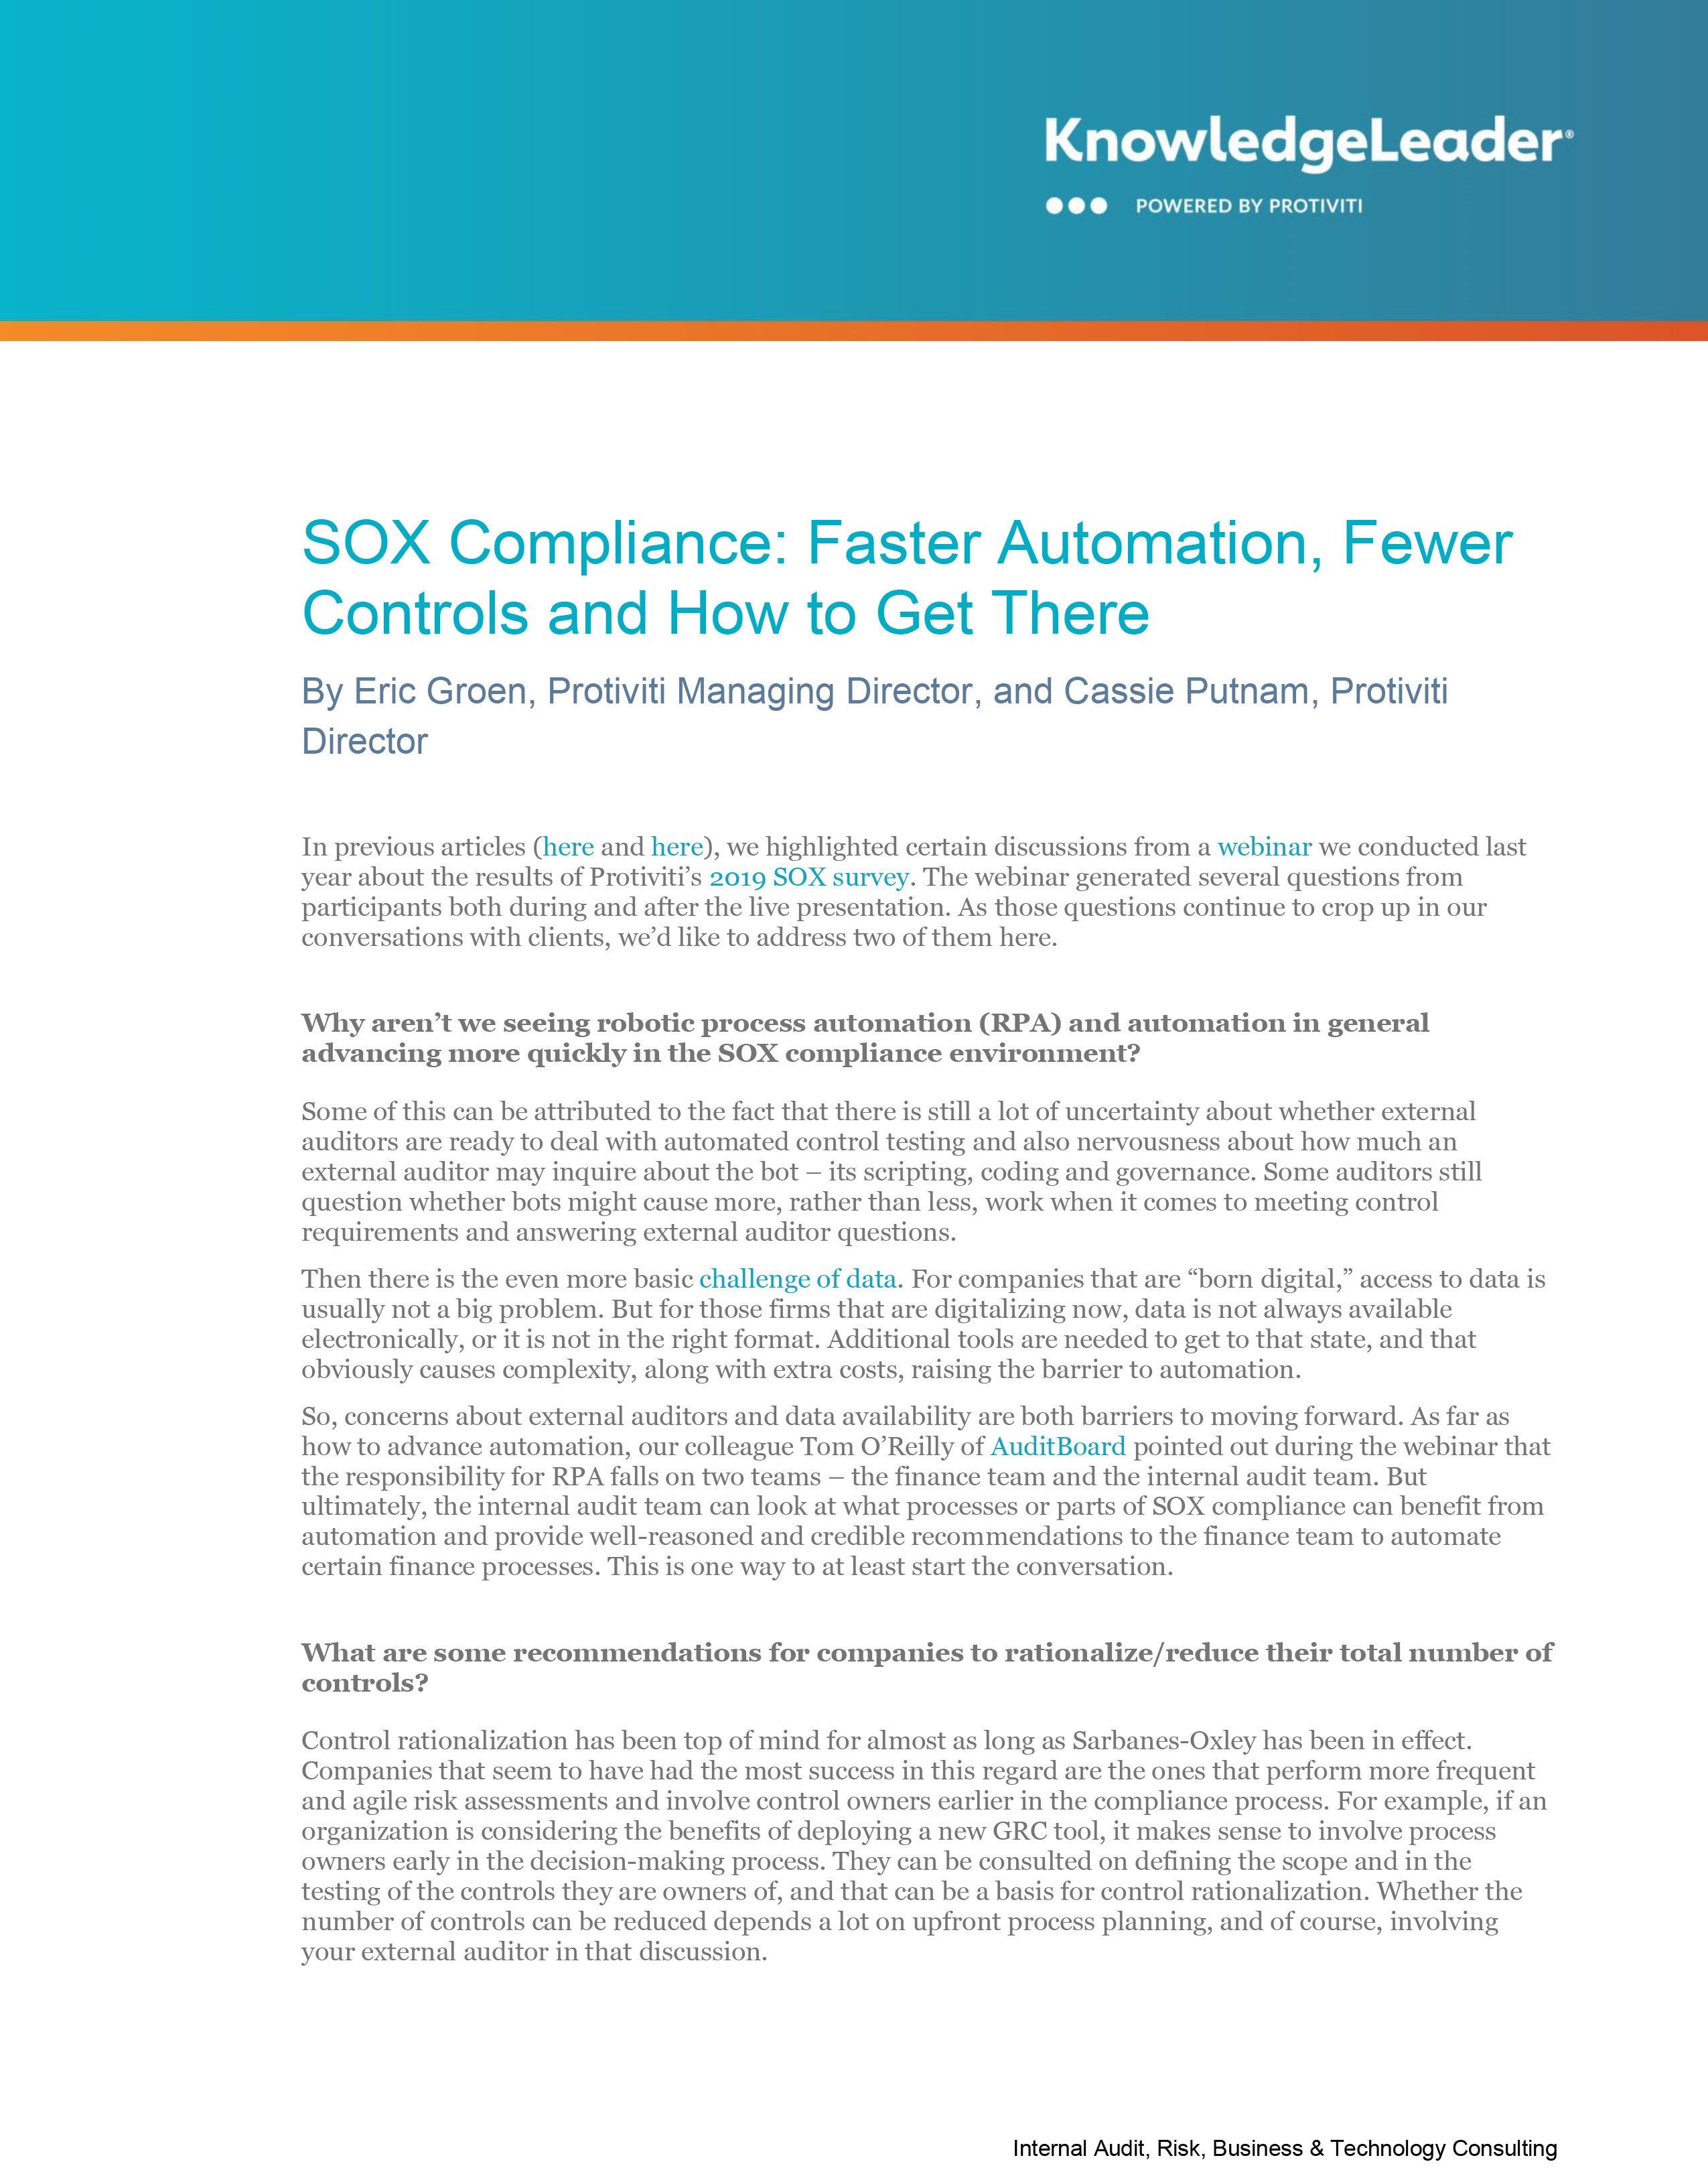 Screenshot of the first page of SOX Compliance Faster Automation Fewer Controls and How to Get There